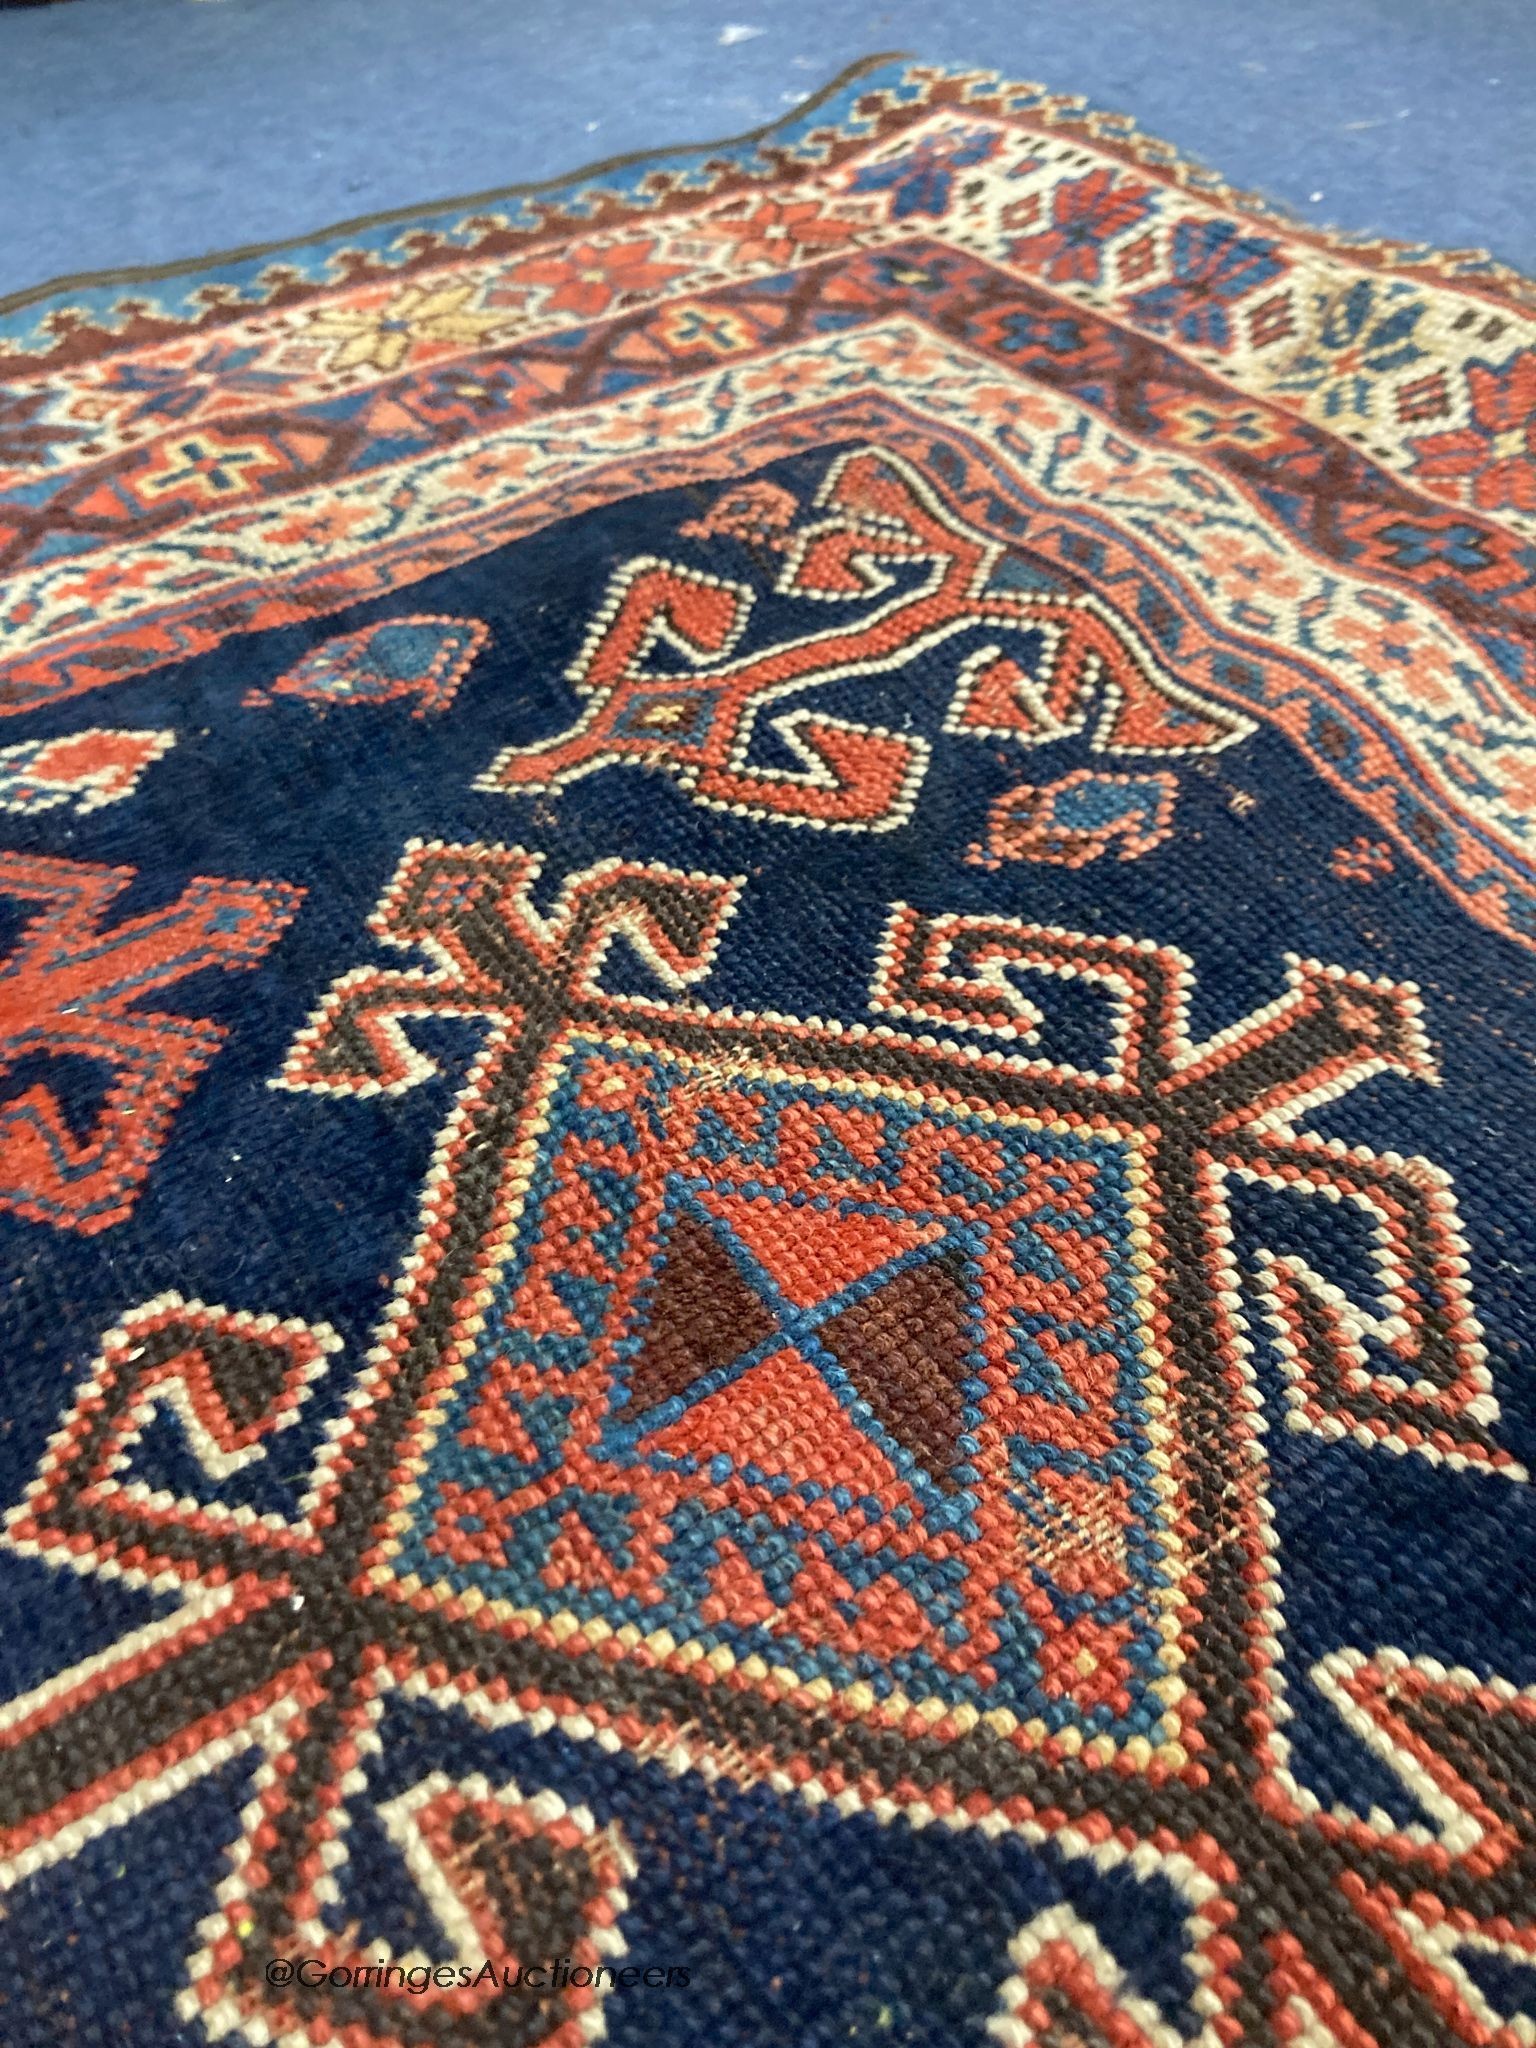 A Caucasian blue ground rug, woven with hooked lozenges, 288 x 152cm